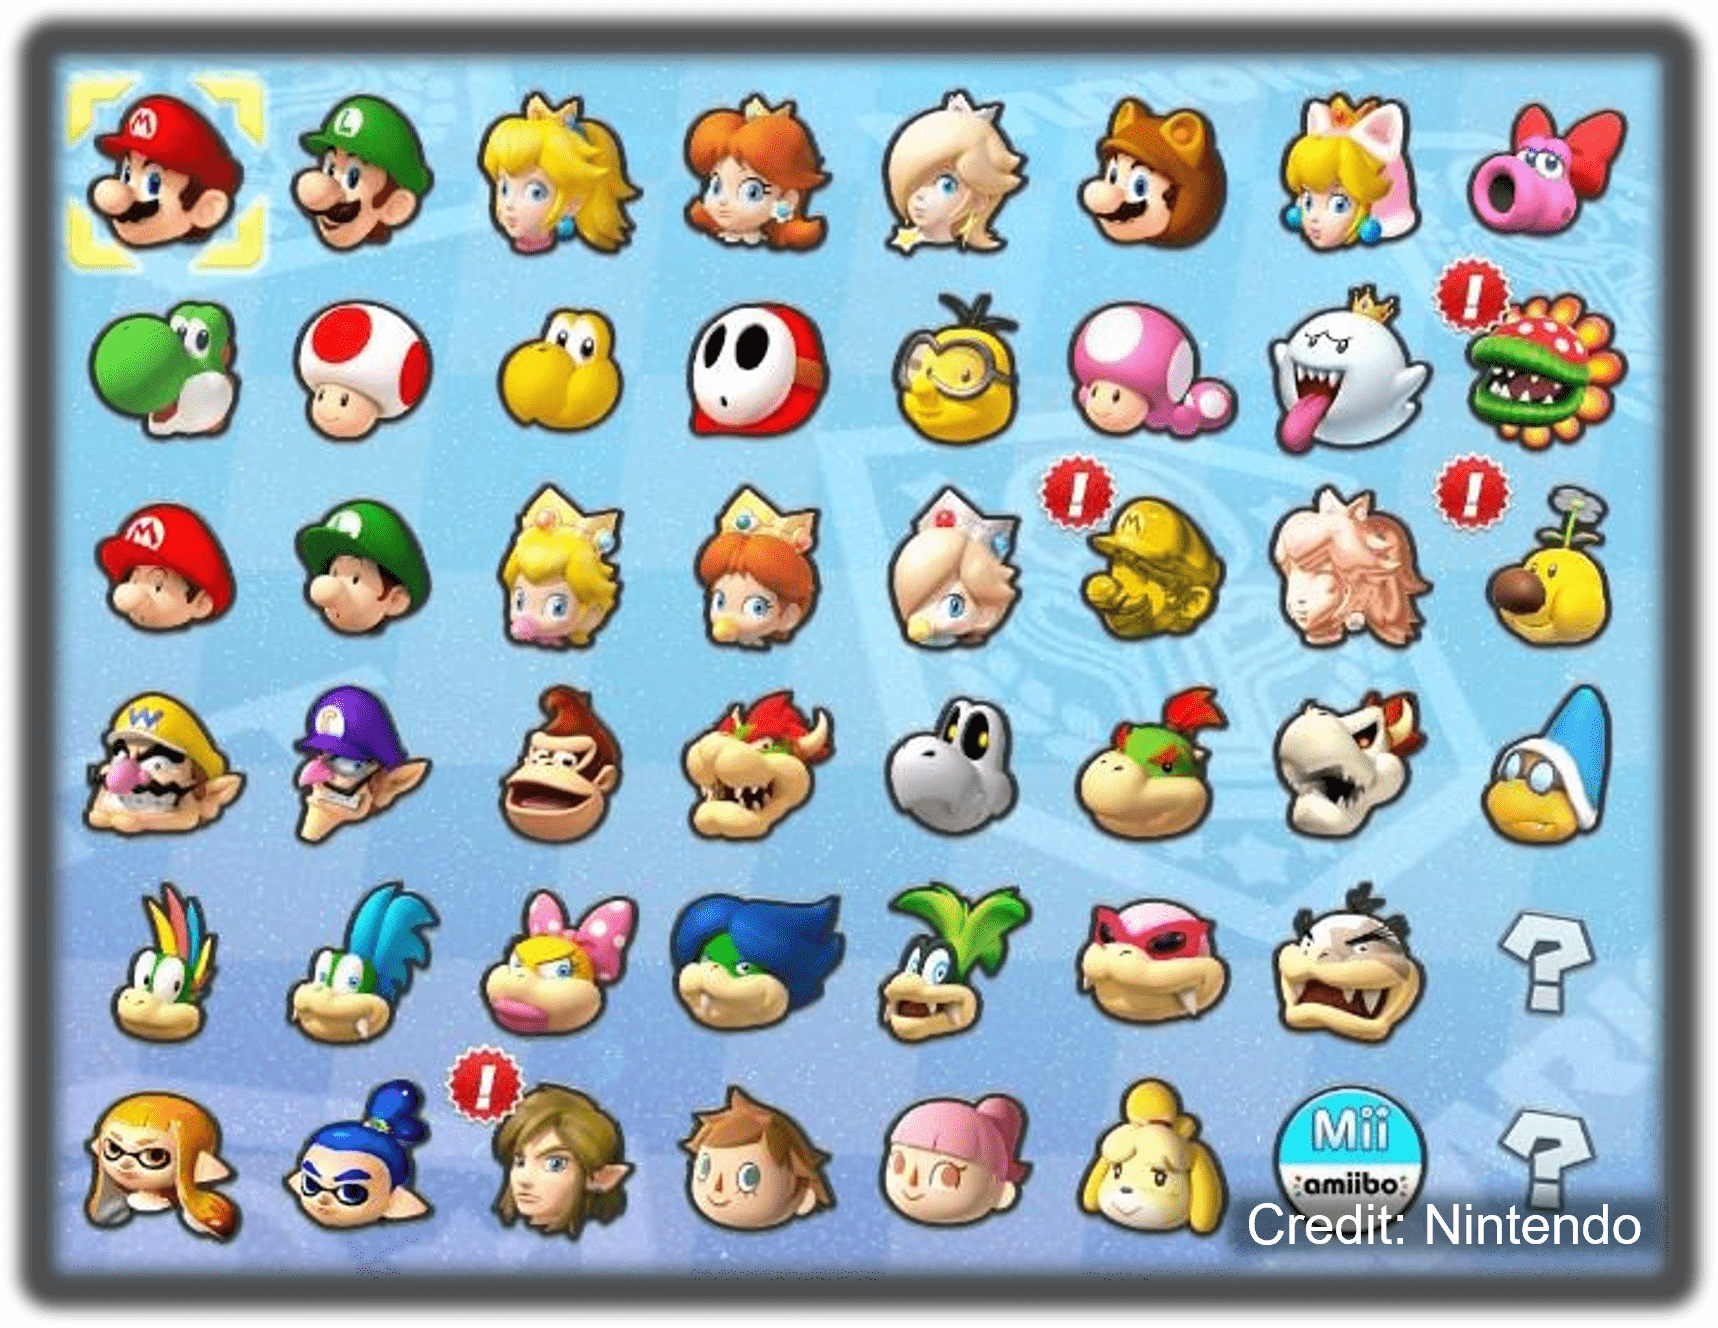 Character choices from Nintendo Mario Kart representing the whole team.